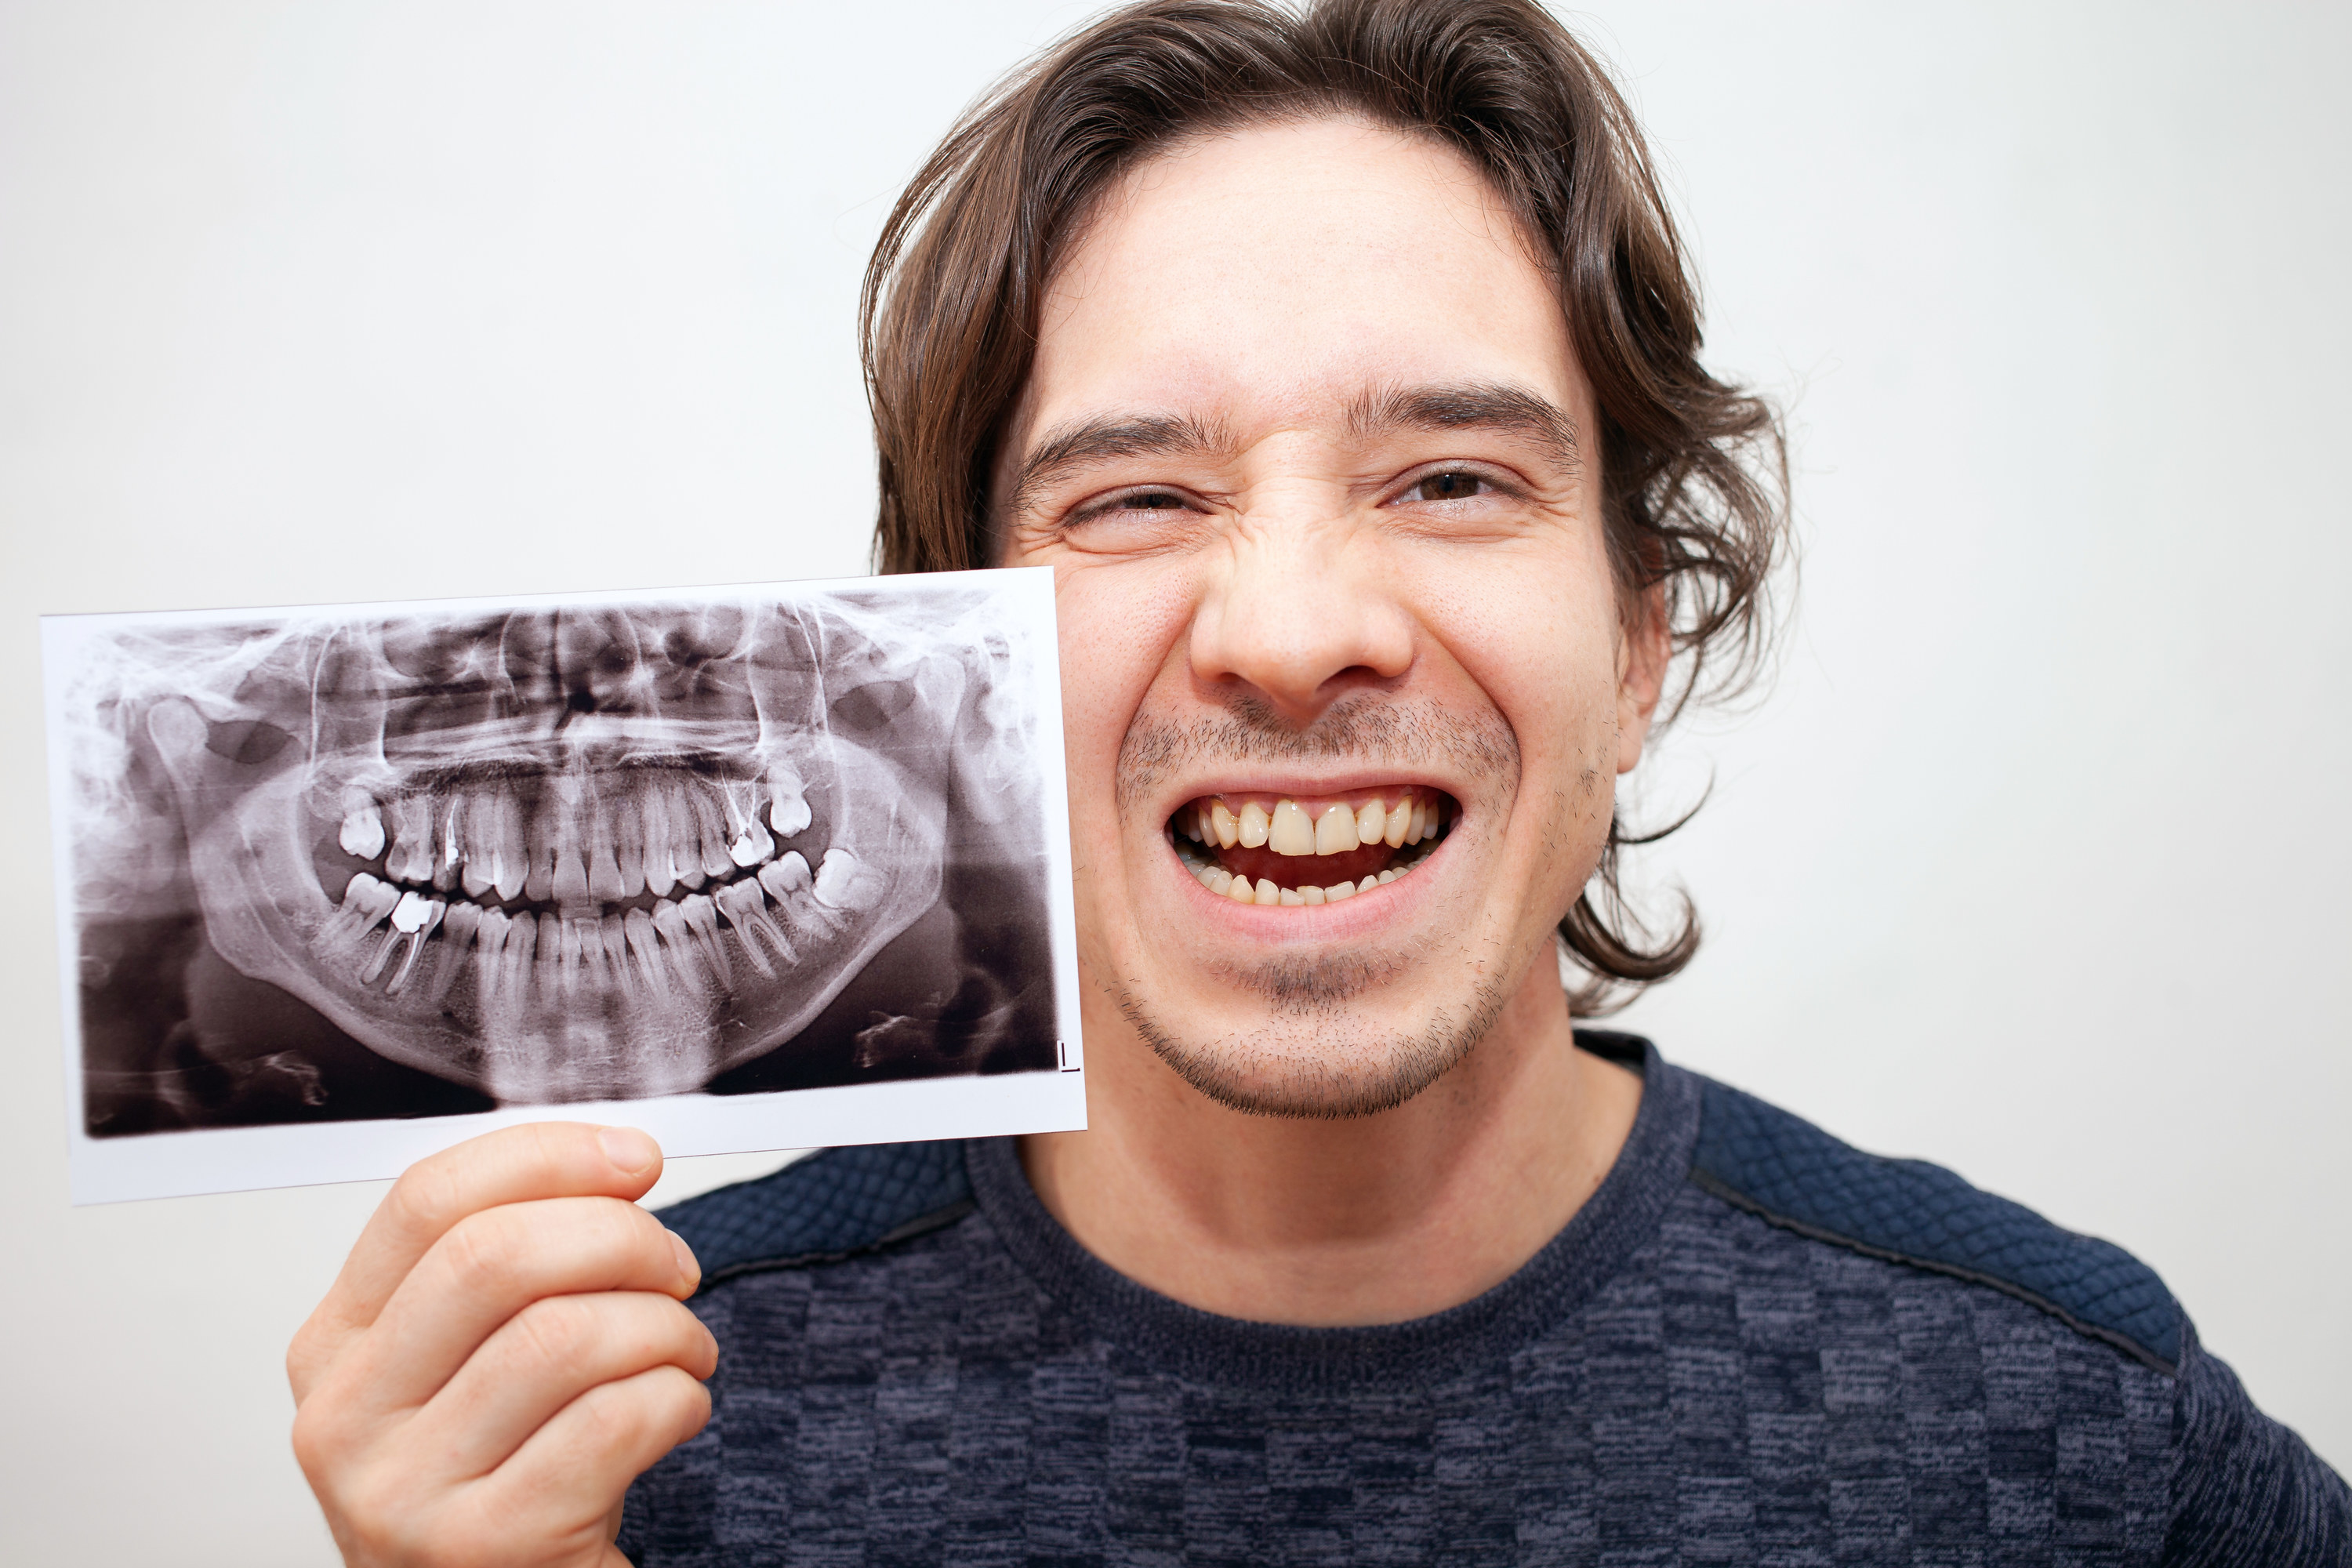 Smiling man holding an xray showing his impacted wisdom teeth